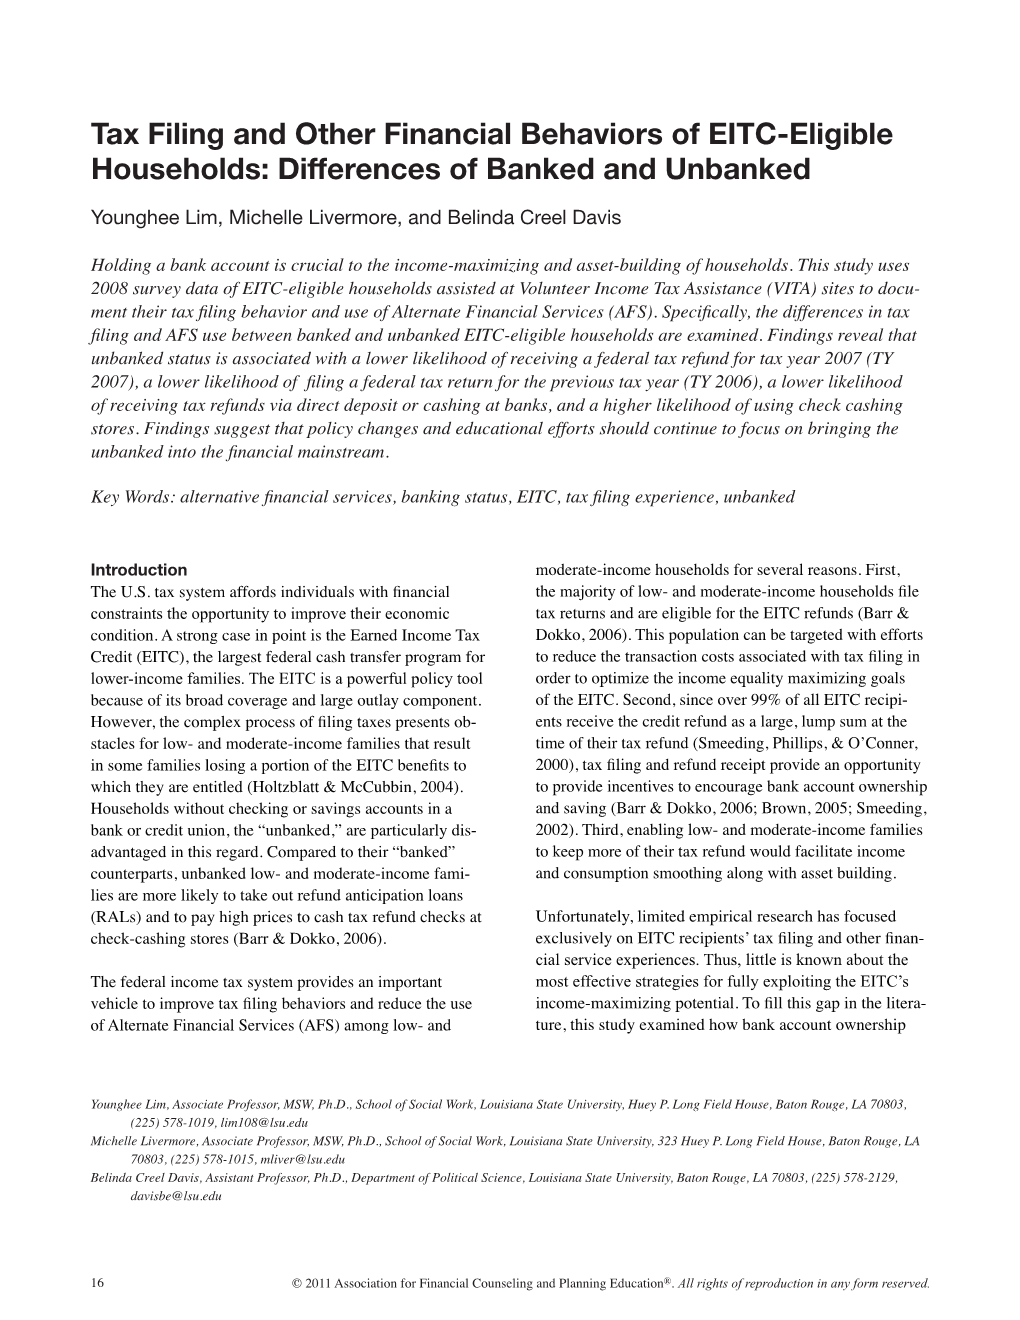 Tax Filing and Other Financial Behaviors of EITC-Eligible Households: Differences of Banked and Unbanked